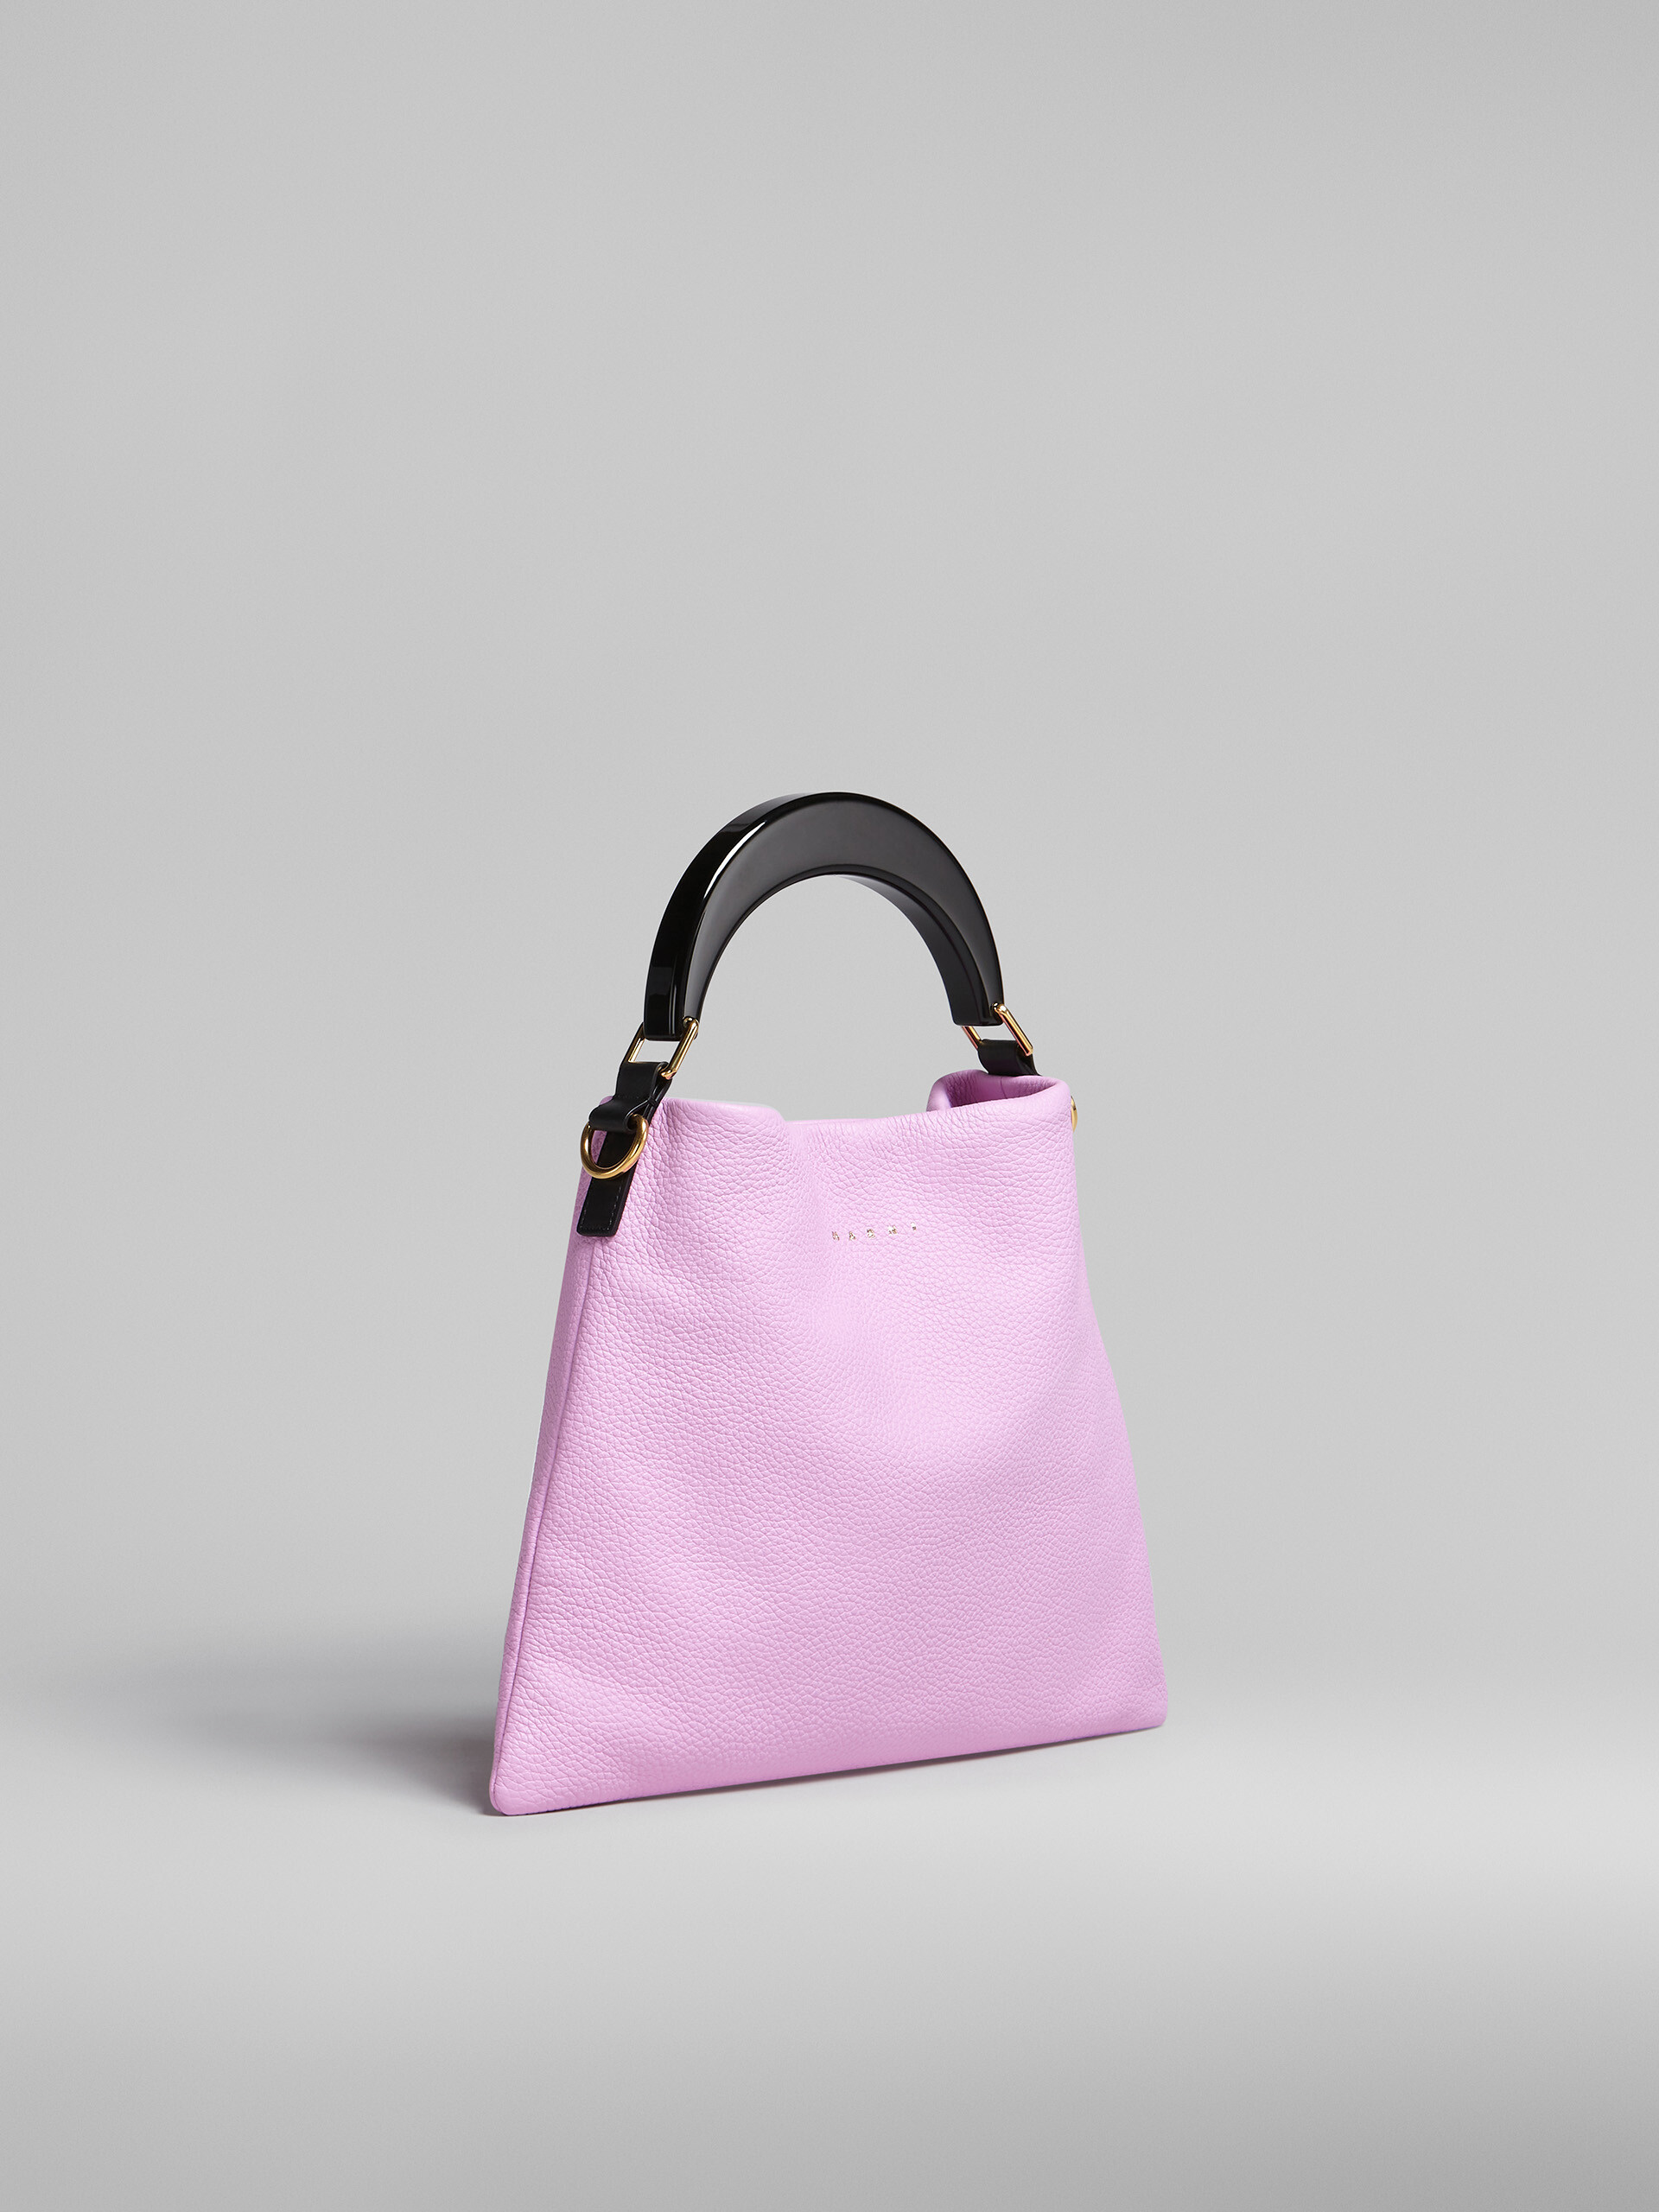 Venice small bag in pink leather - Shoulder Bags - Image 6